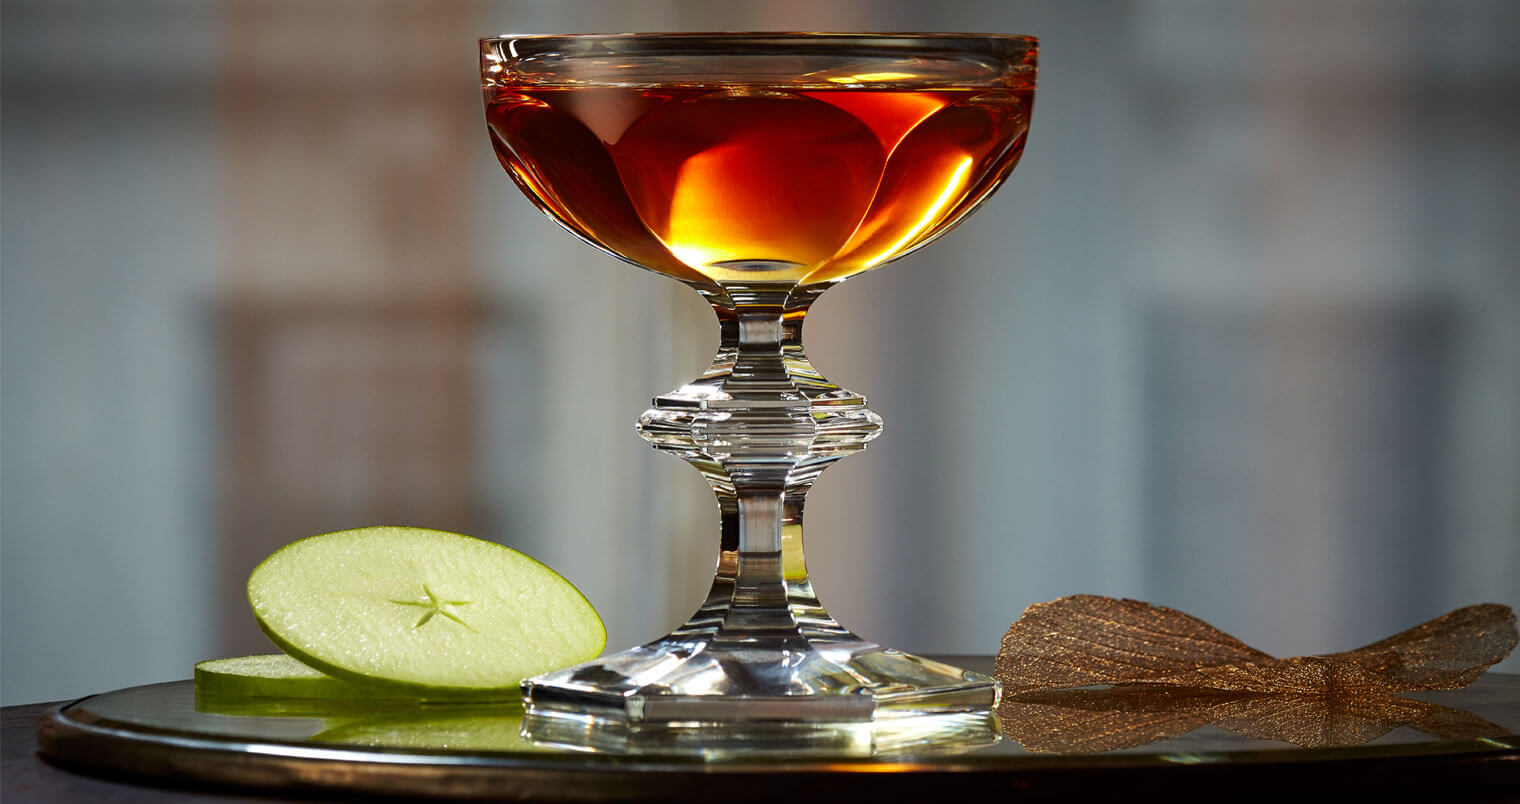 Star of Autumn, cocktail in ornate challise, featured image